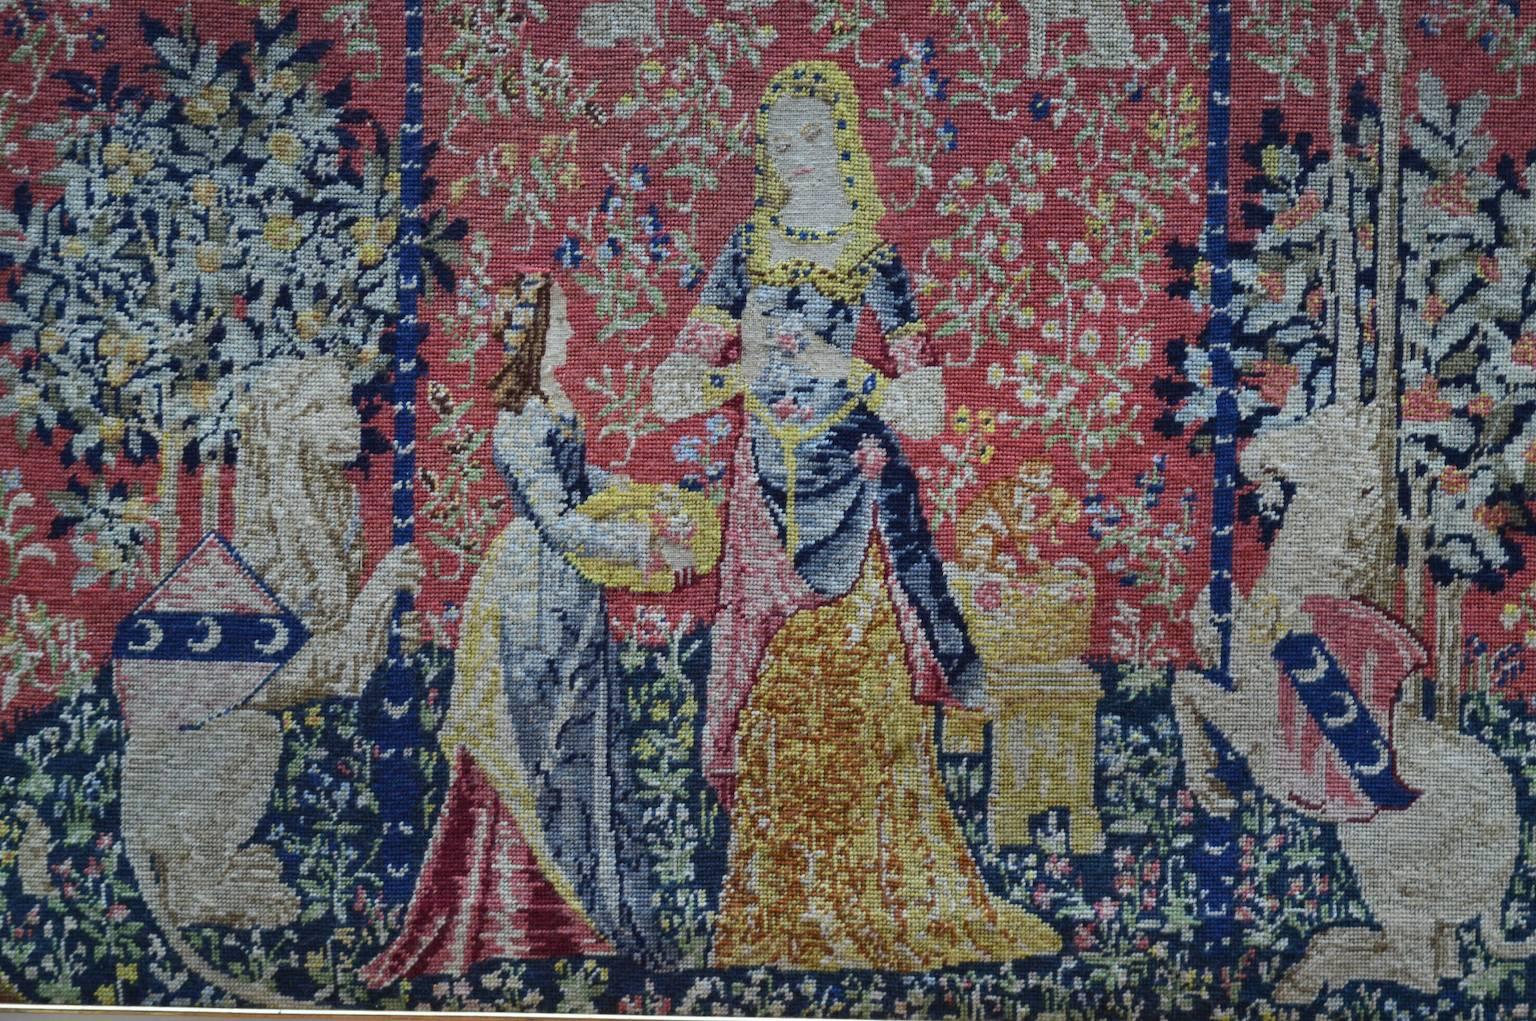 Beautifully executed Medieval style wool tapestry handmade using needlepoint and petit point stitches. Framed in a wood gesso and gold leaf frame. 

Inspired by 